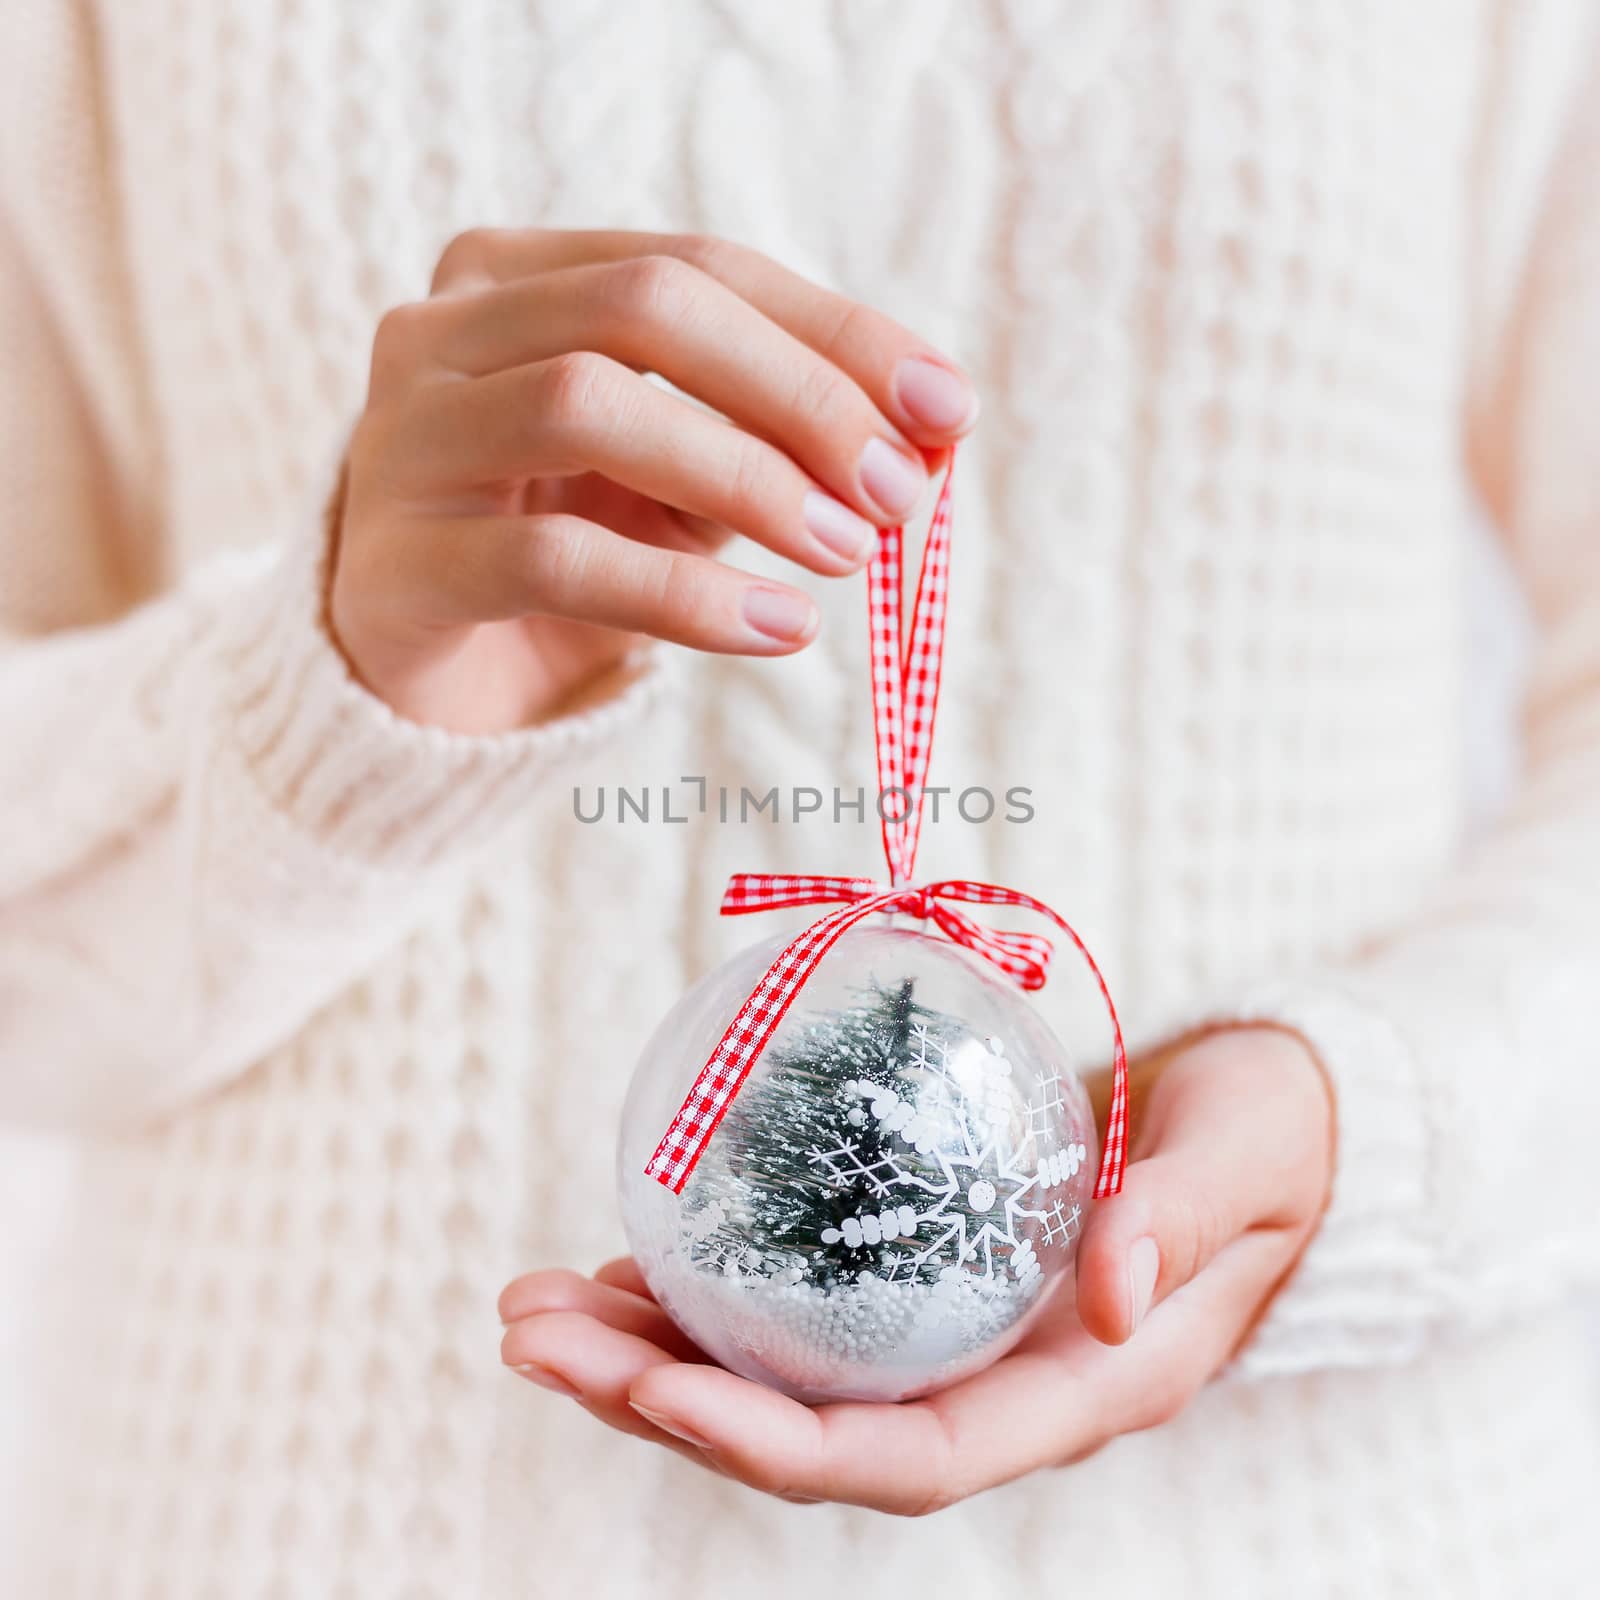 Woman in knitted sweater is holding Christmas decoration - transparent glass ball with ribbon and snowy fir tree inside. New Year snow globe.